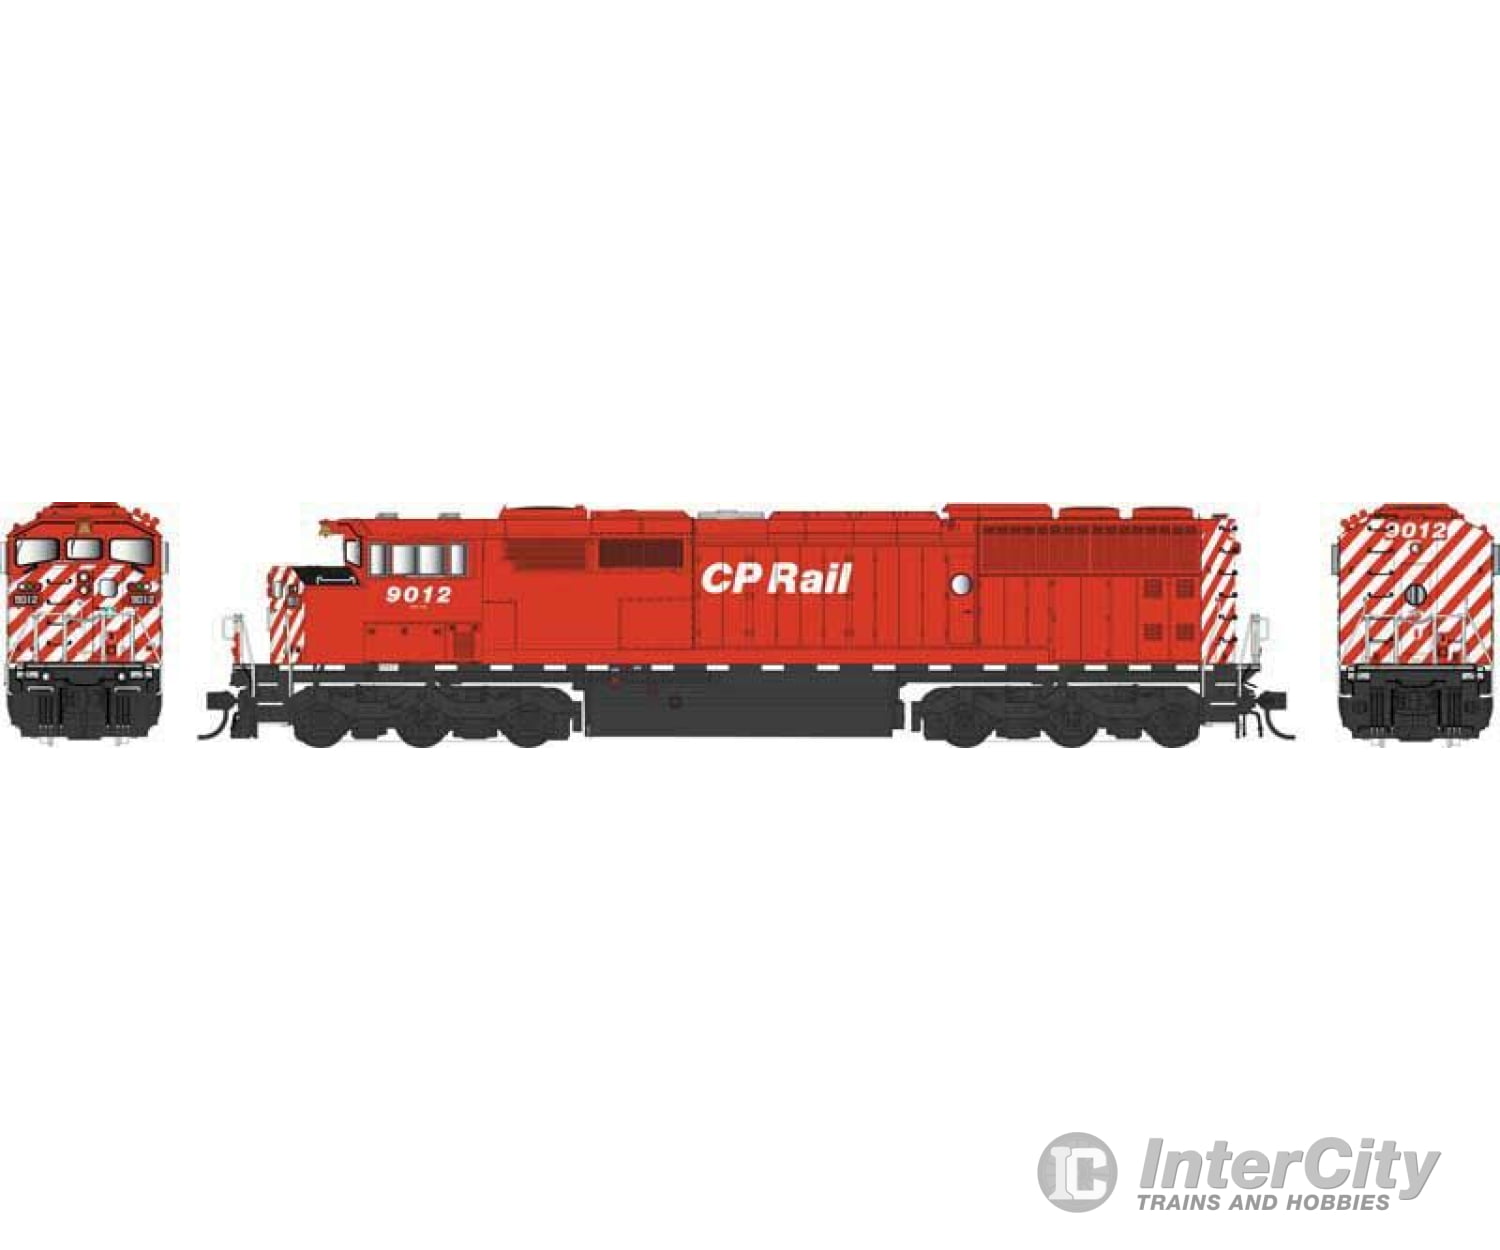 Bowser 25010 Ho Gmd Sd40-2F - Loksound & Dcc Executive Line -- Canadian Pacific #9012 (Action Red